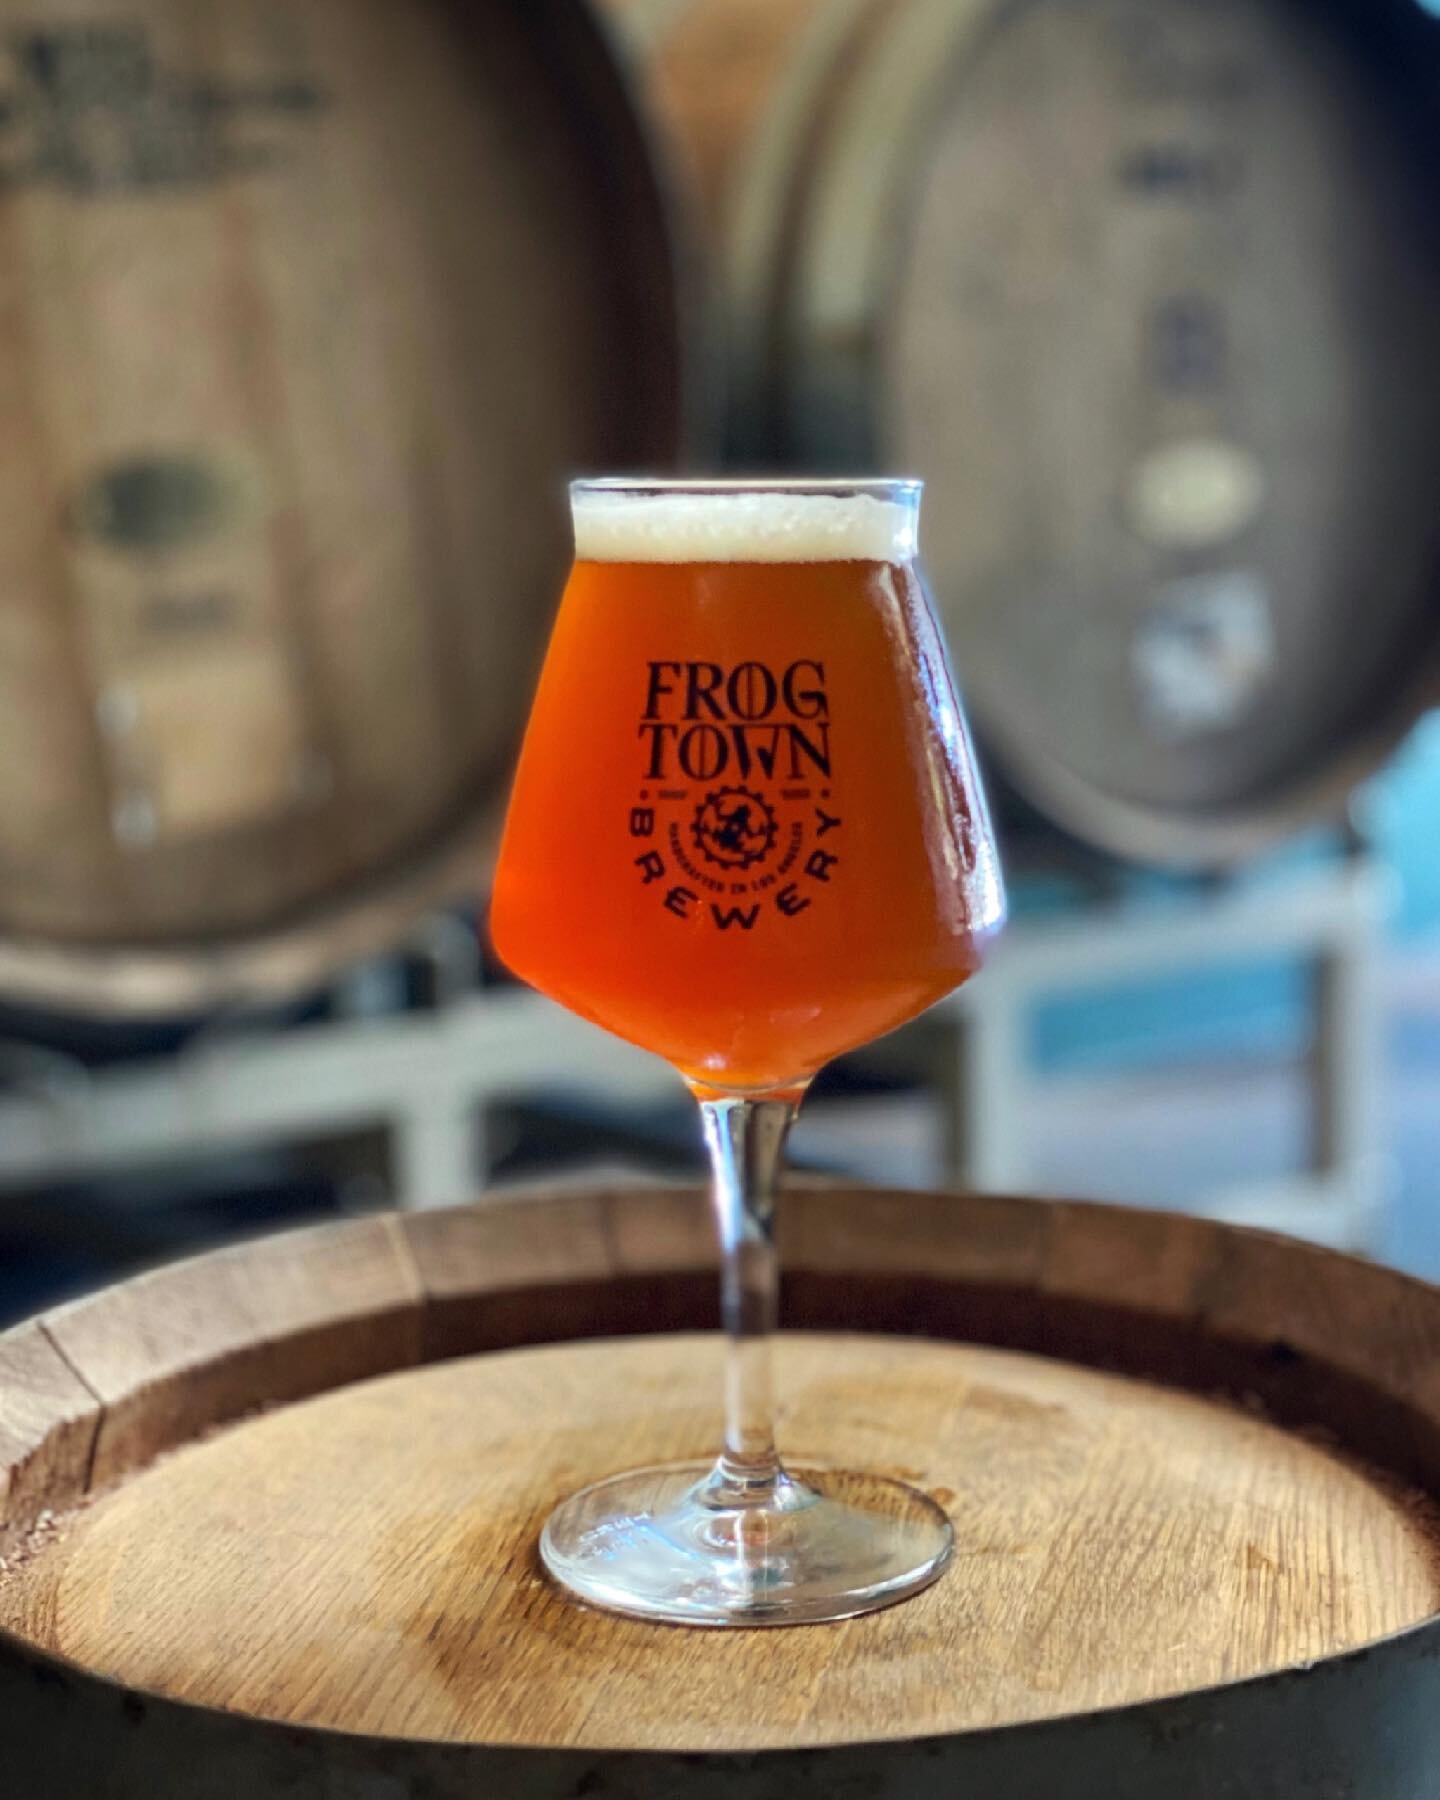 LIMITED RELEASE OUT TODAY: Sauvignon Blanc Barrel-aged Third Base Belgian Tripel 

We just tapped a limited version of our Third Base - Belgian Tripel that was aged in Sauvignon Blanc barrels. Available on draft only while supplies last (no Crowler/g